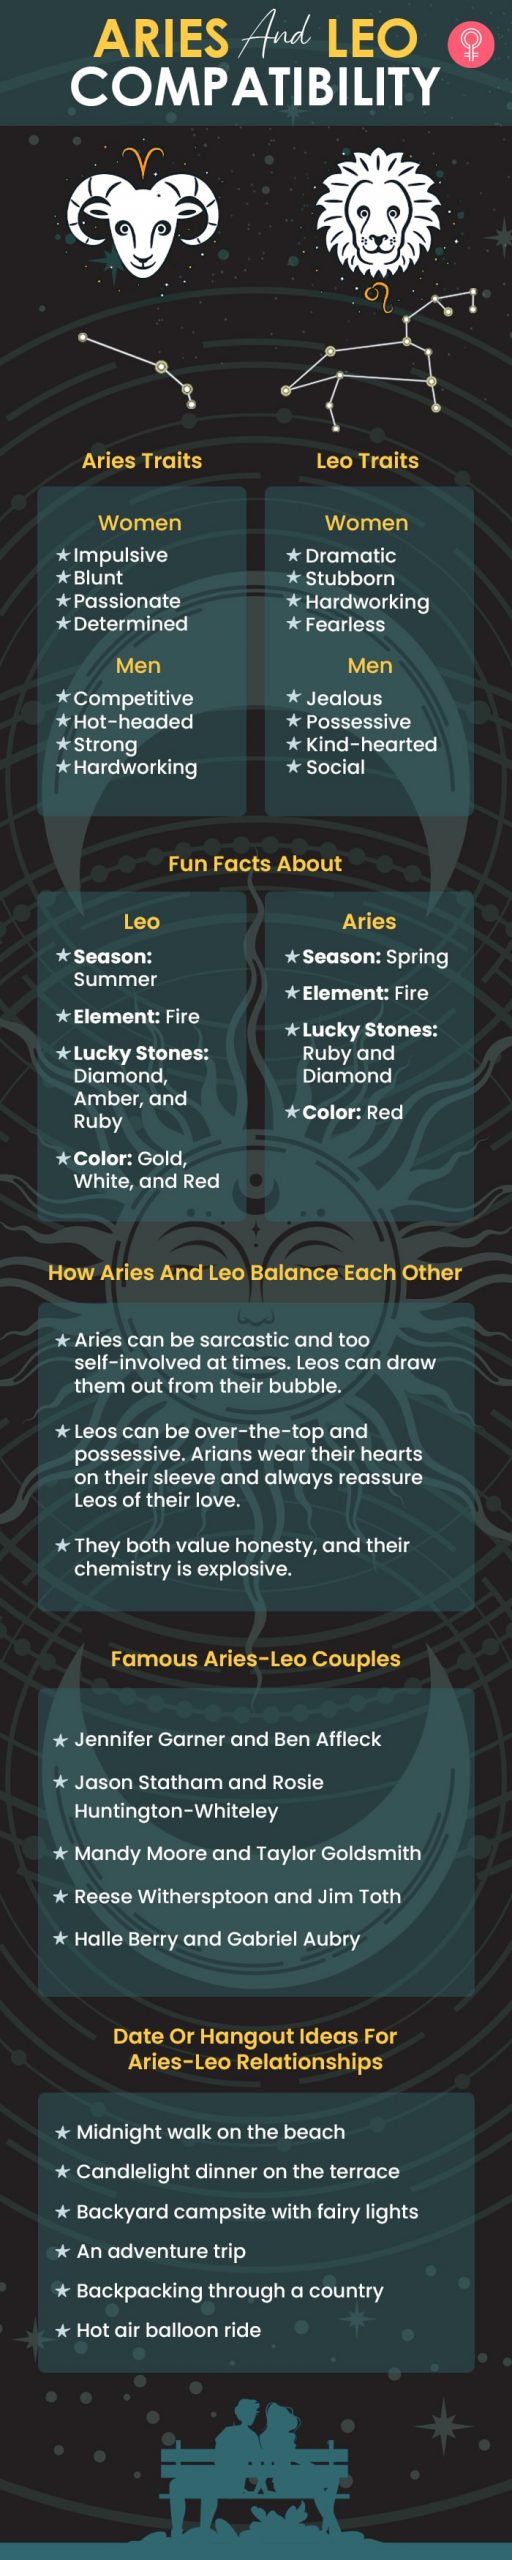 aries and leo compatibility [infographic]style=